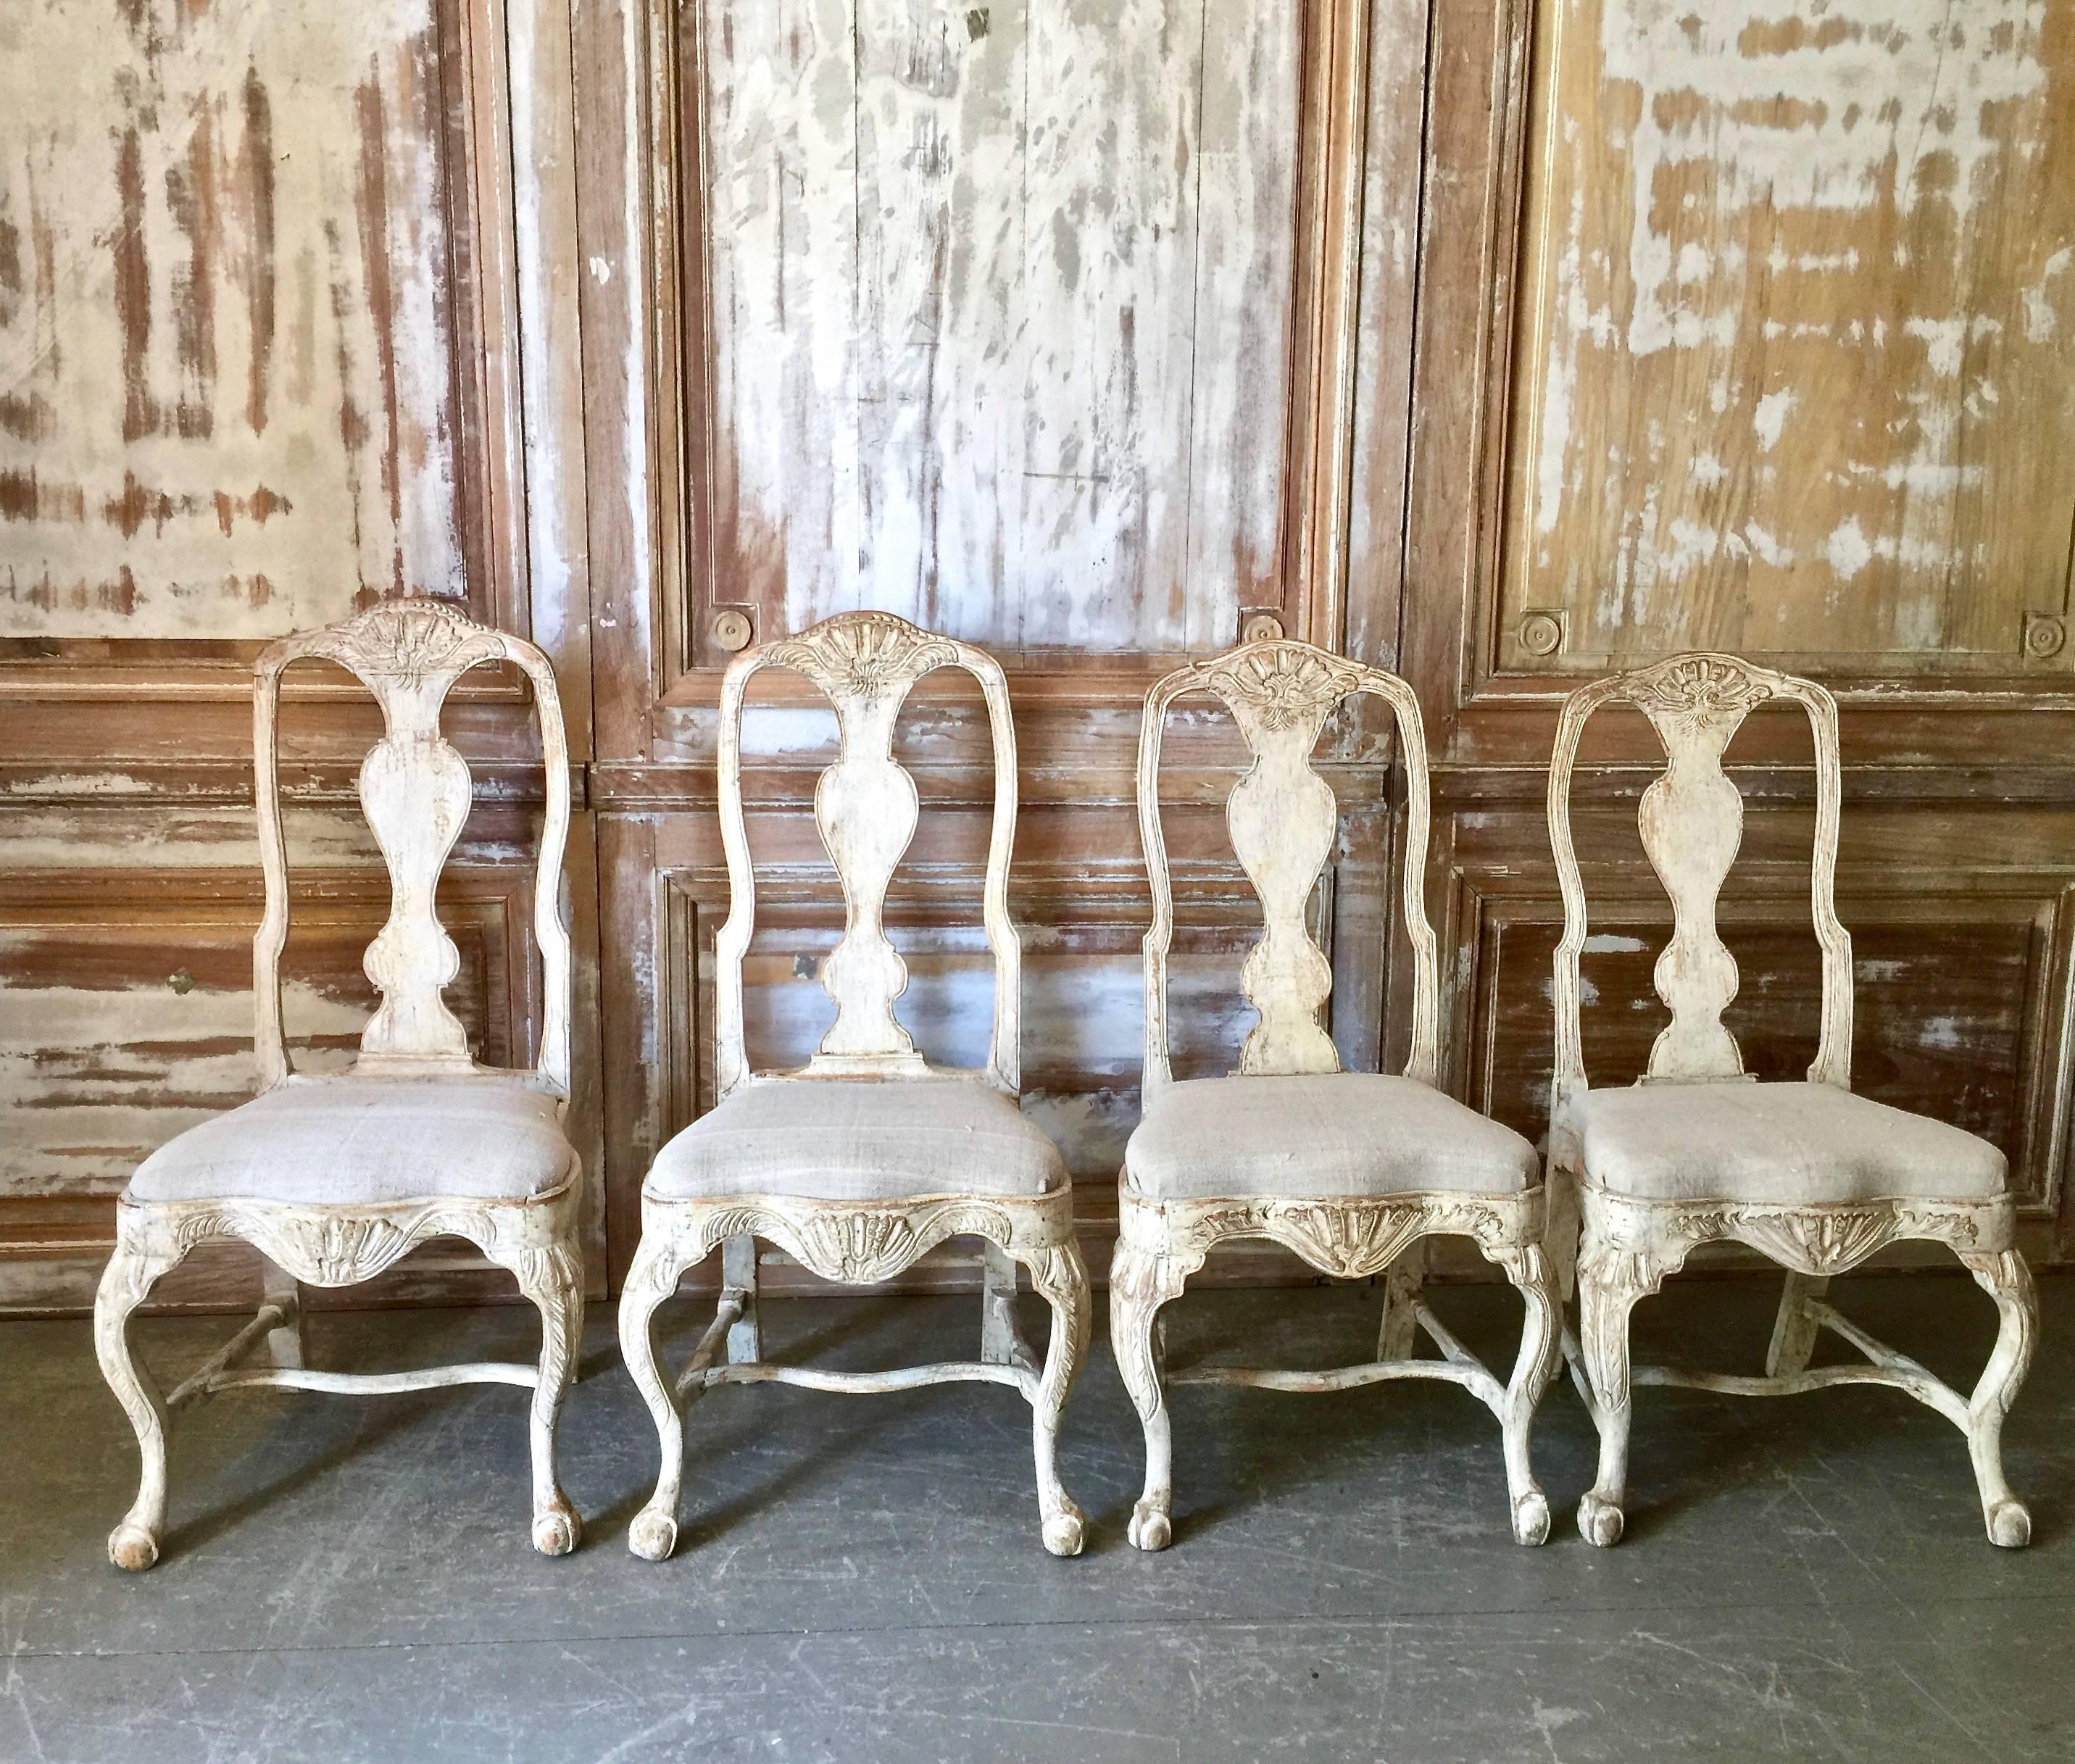 Charming Family of four 18th century Swedish chairs in Rococo period, circa 1760. Lovingly handmade with richly carving in traces of their original worn patina. Each chair being made in slightly diffrent hight. Upholstered with antique raw linen.